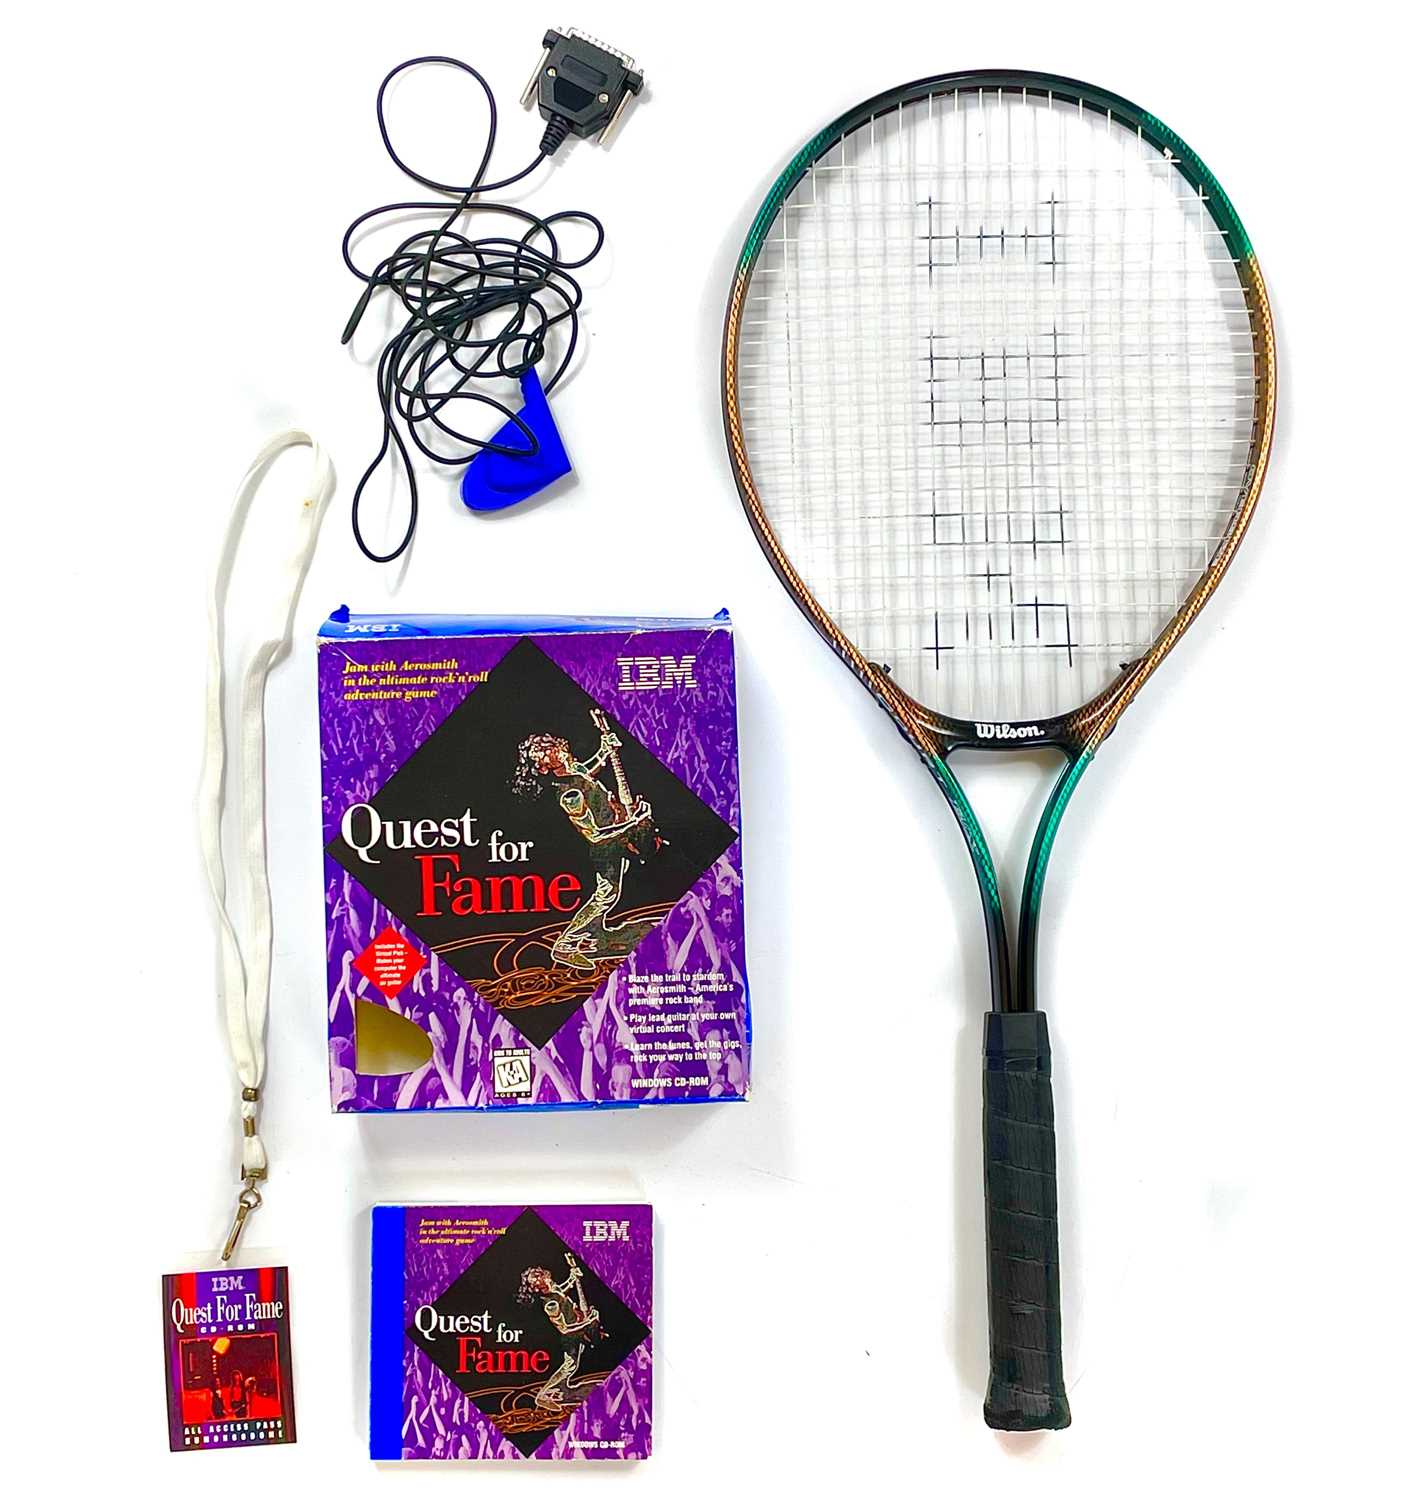 An Aerosmith Quest For Fame video game and tennis racket.